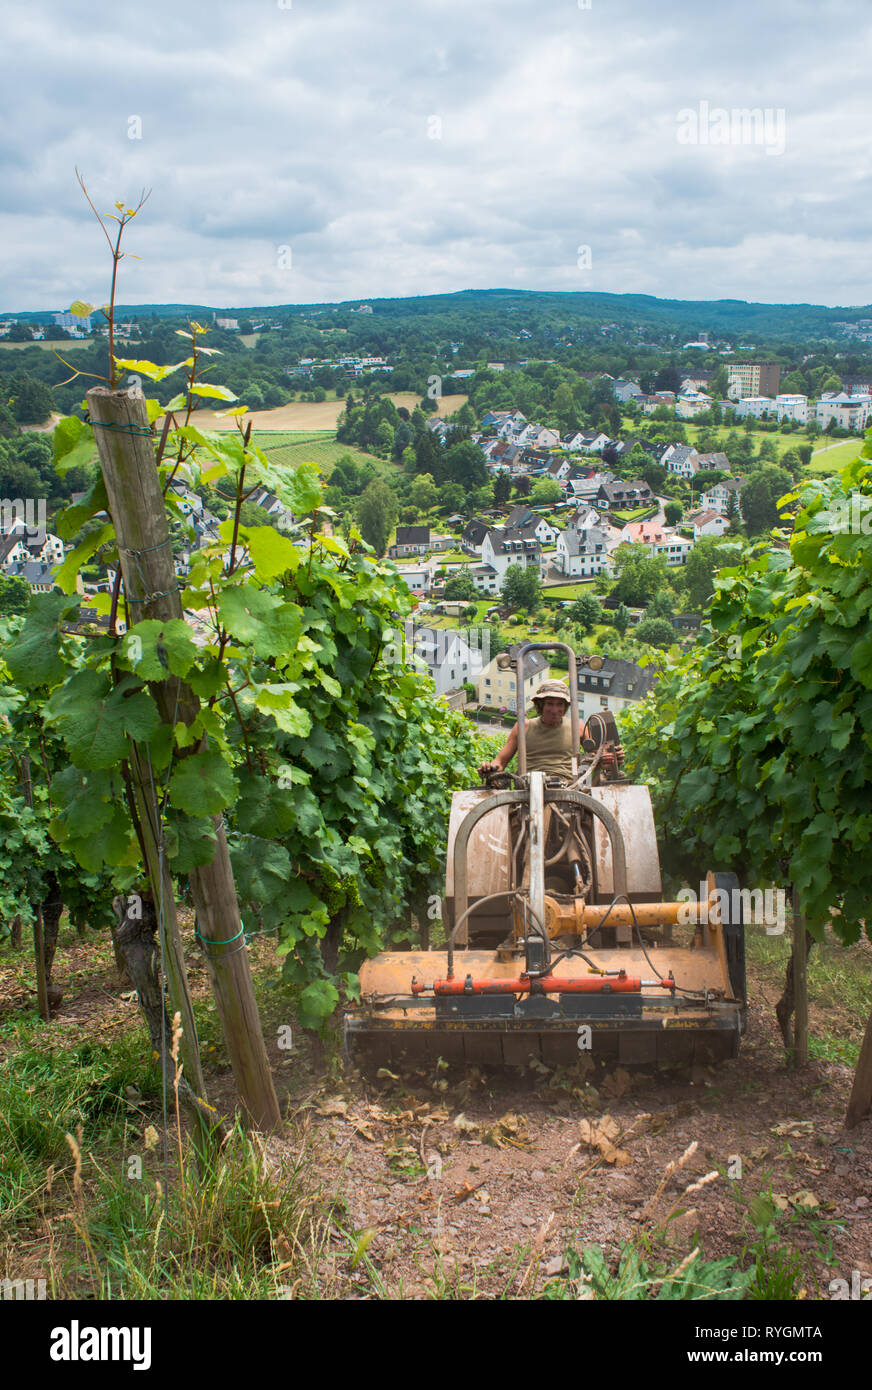 Tractor works at grapeyard near the Trier, Mosel river valley, Germany Stock Photo